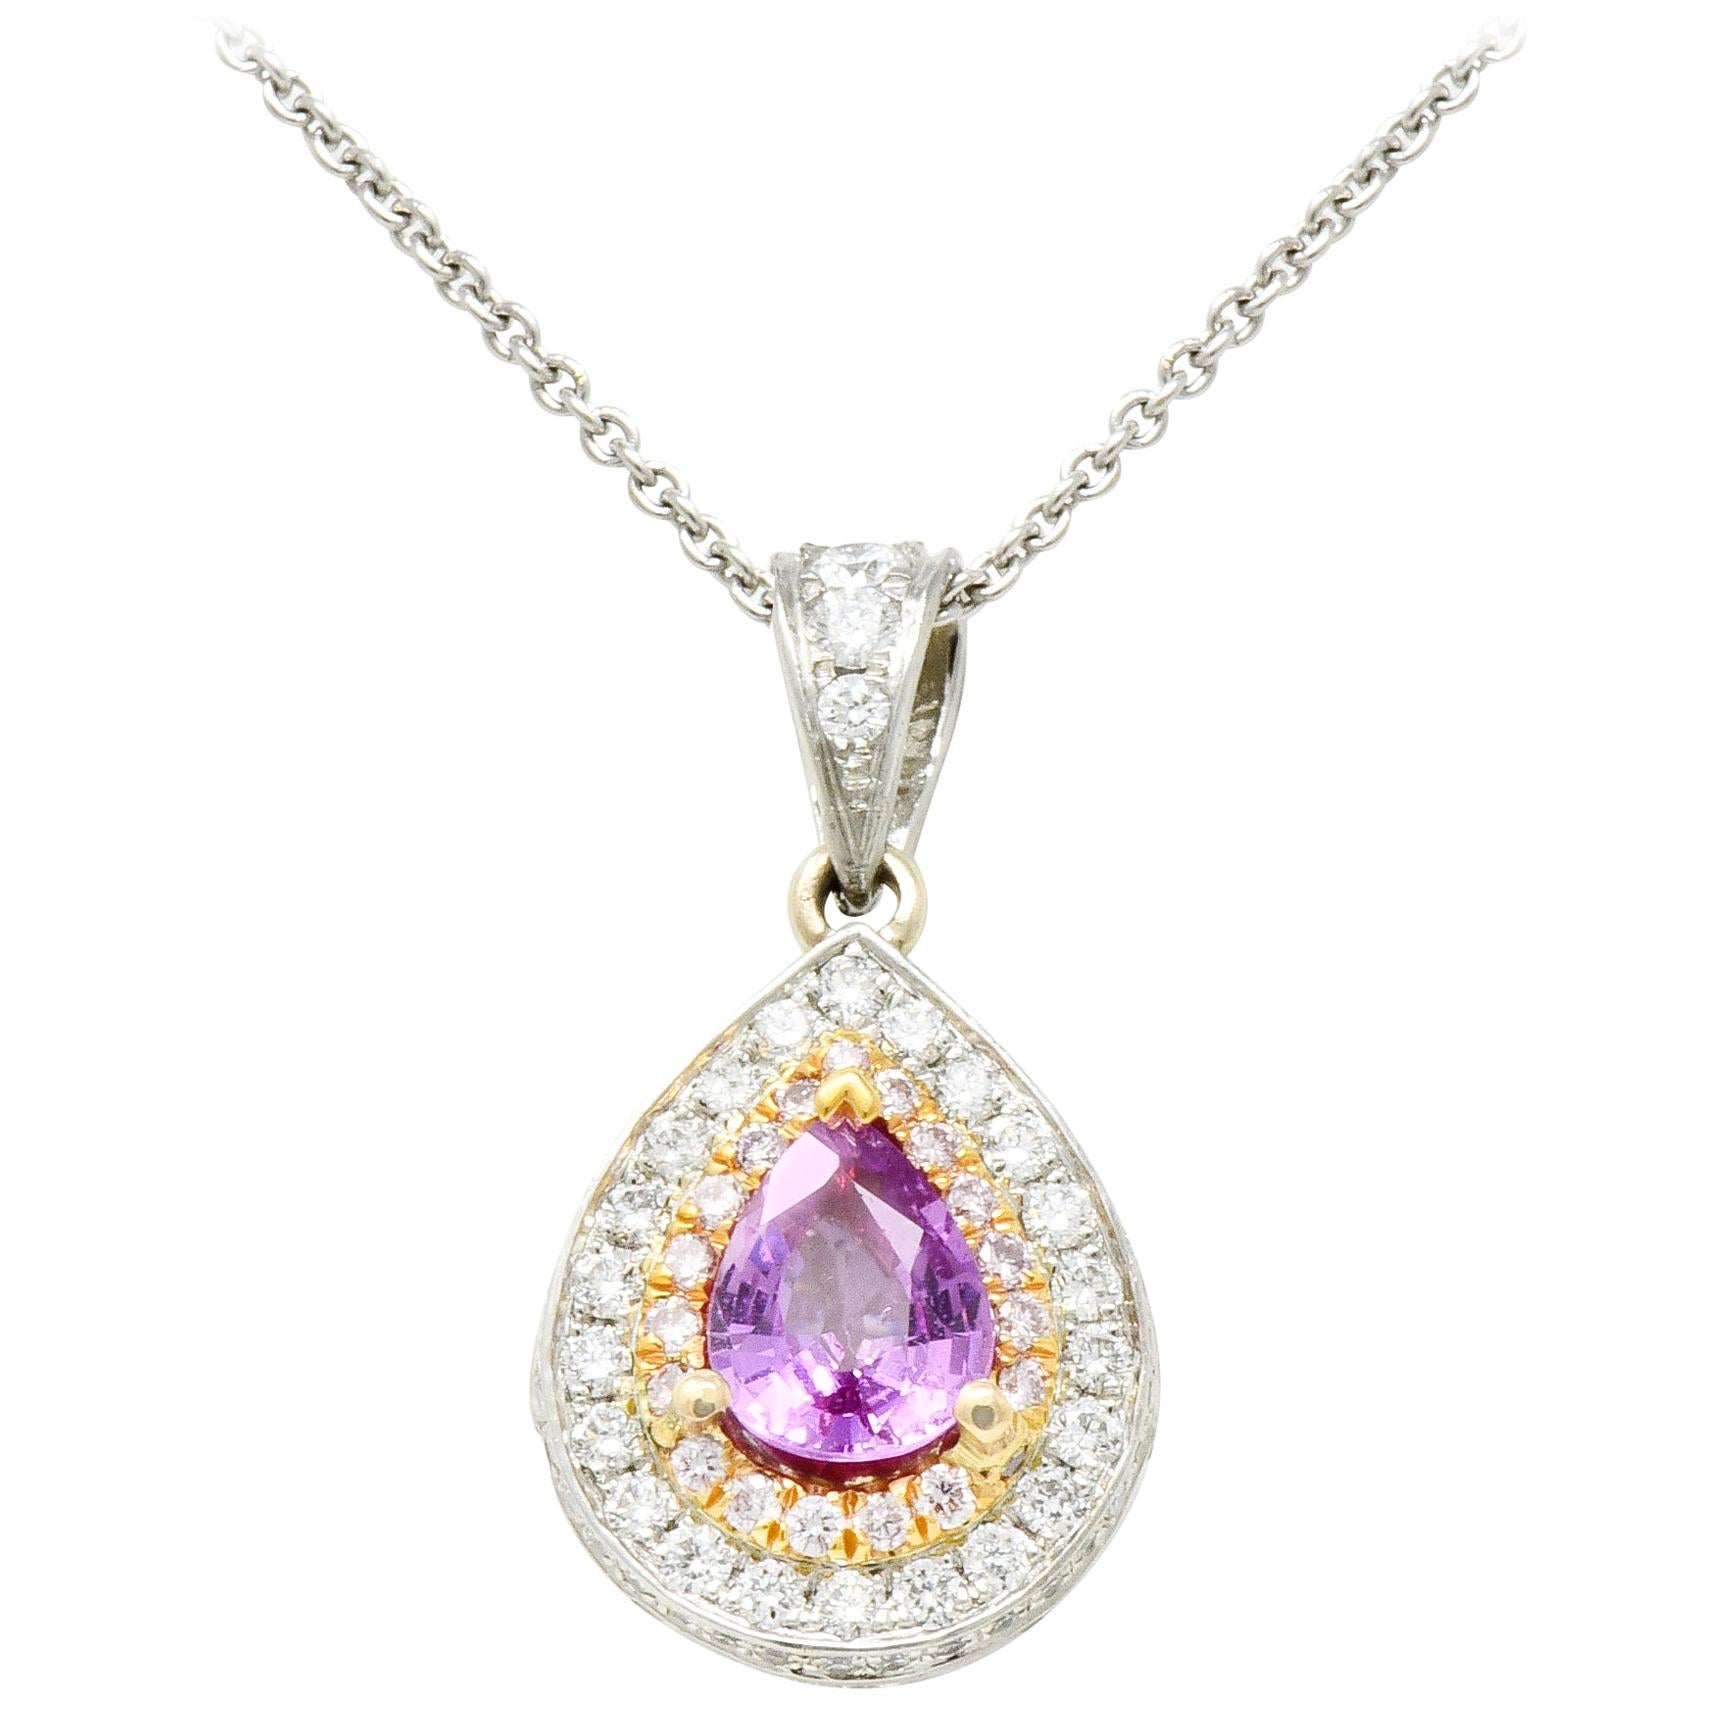 Charles Krypell Pink Sapphire Pink and White Diamond 18 Karat Gold Pear Pendant